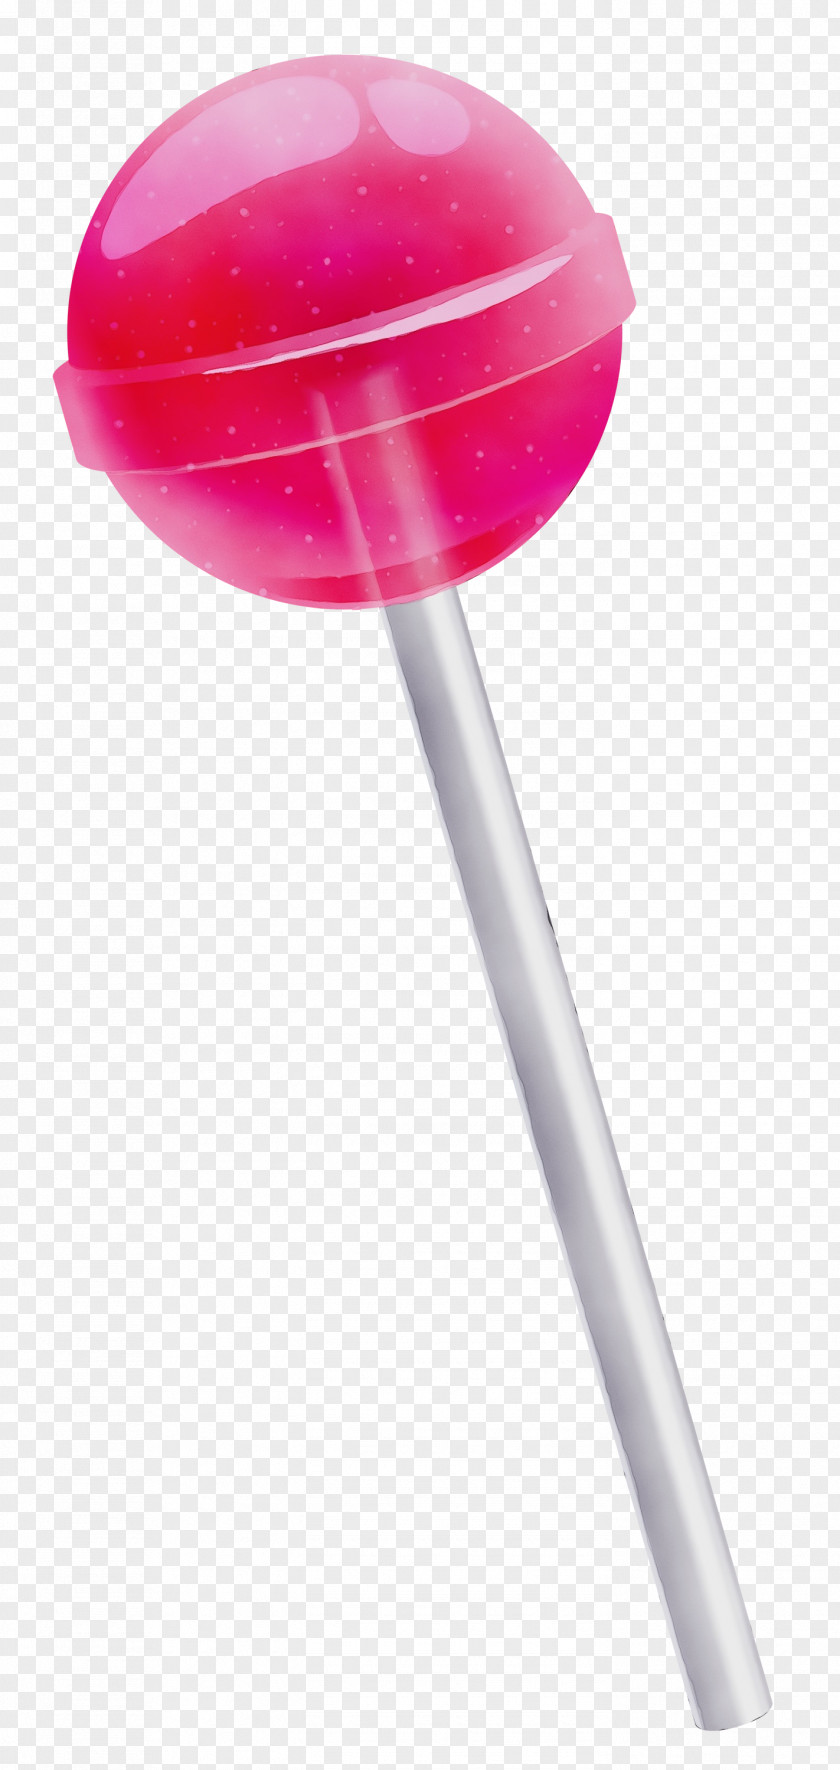 Confectionery Magenta Lollipop Candy Transparency Bonbon Chupa Chups PNG